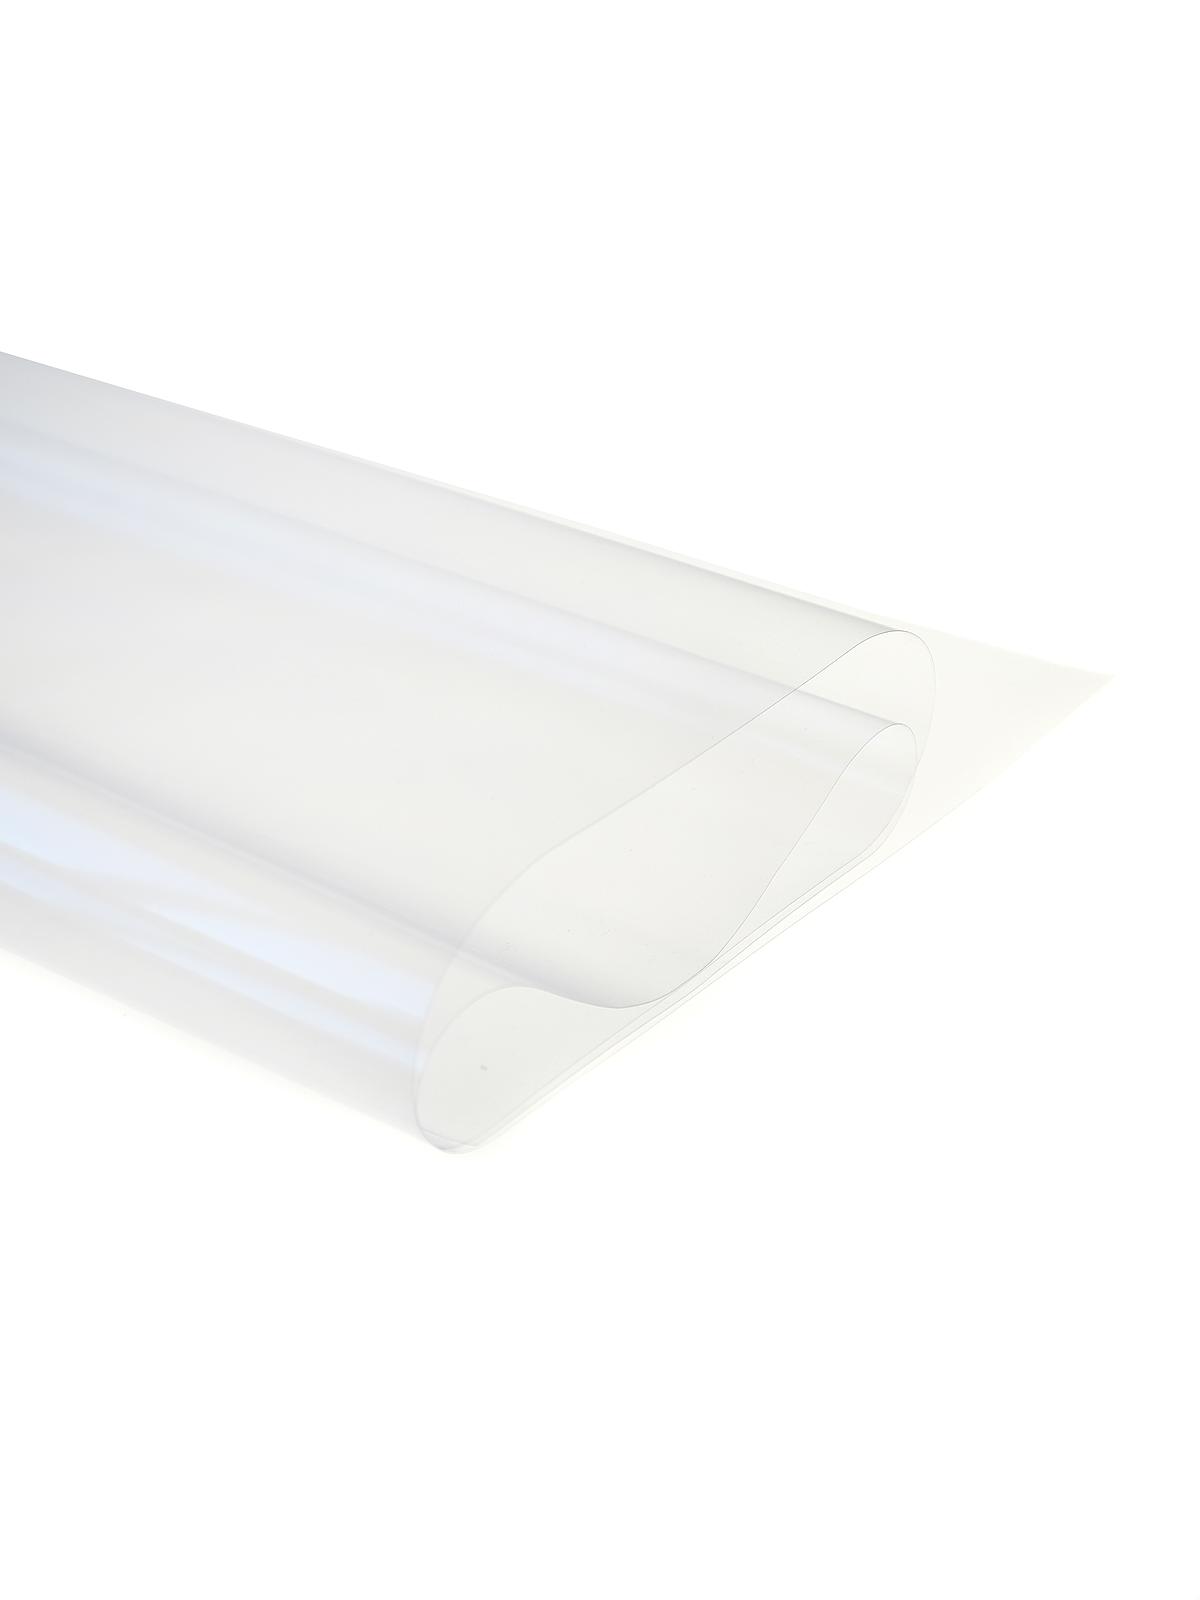 Clear-lay Plastic Film 0.005 25 In. X 40 In. Sheet